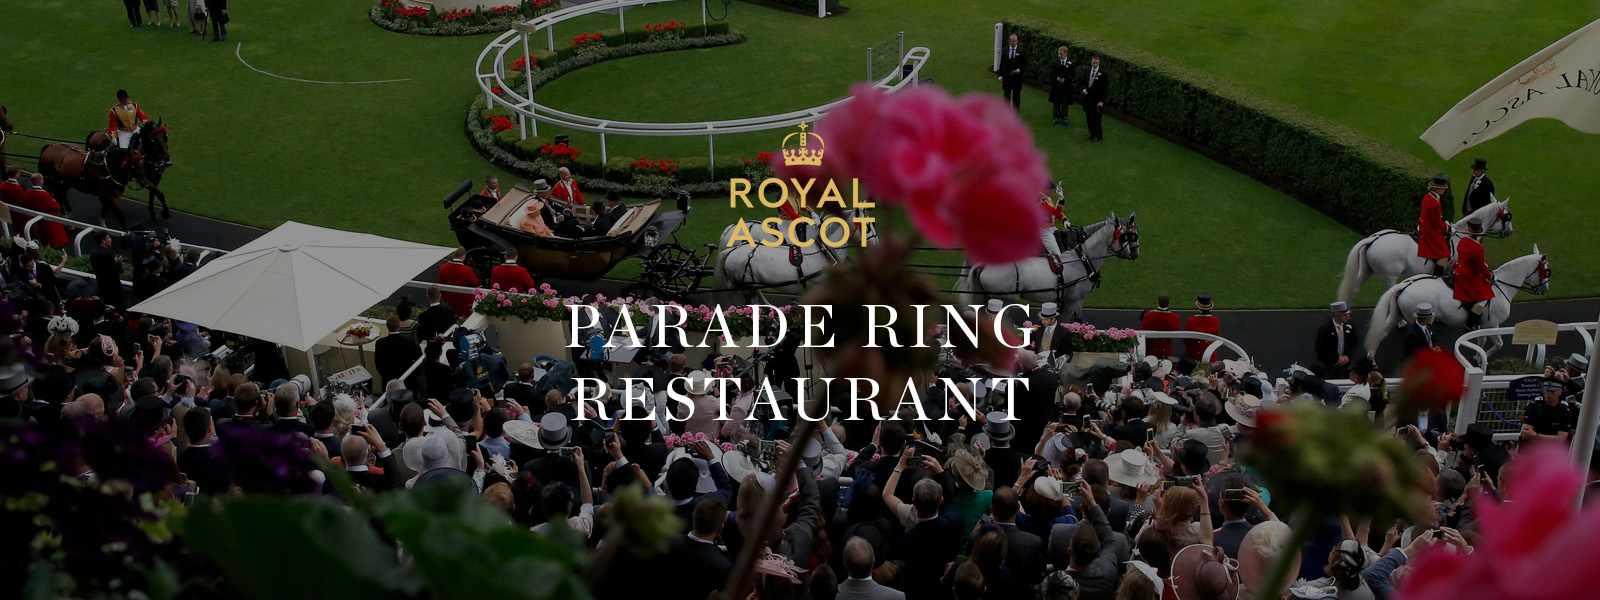 Parade Ring Restaurant Hospitality package